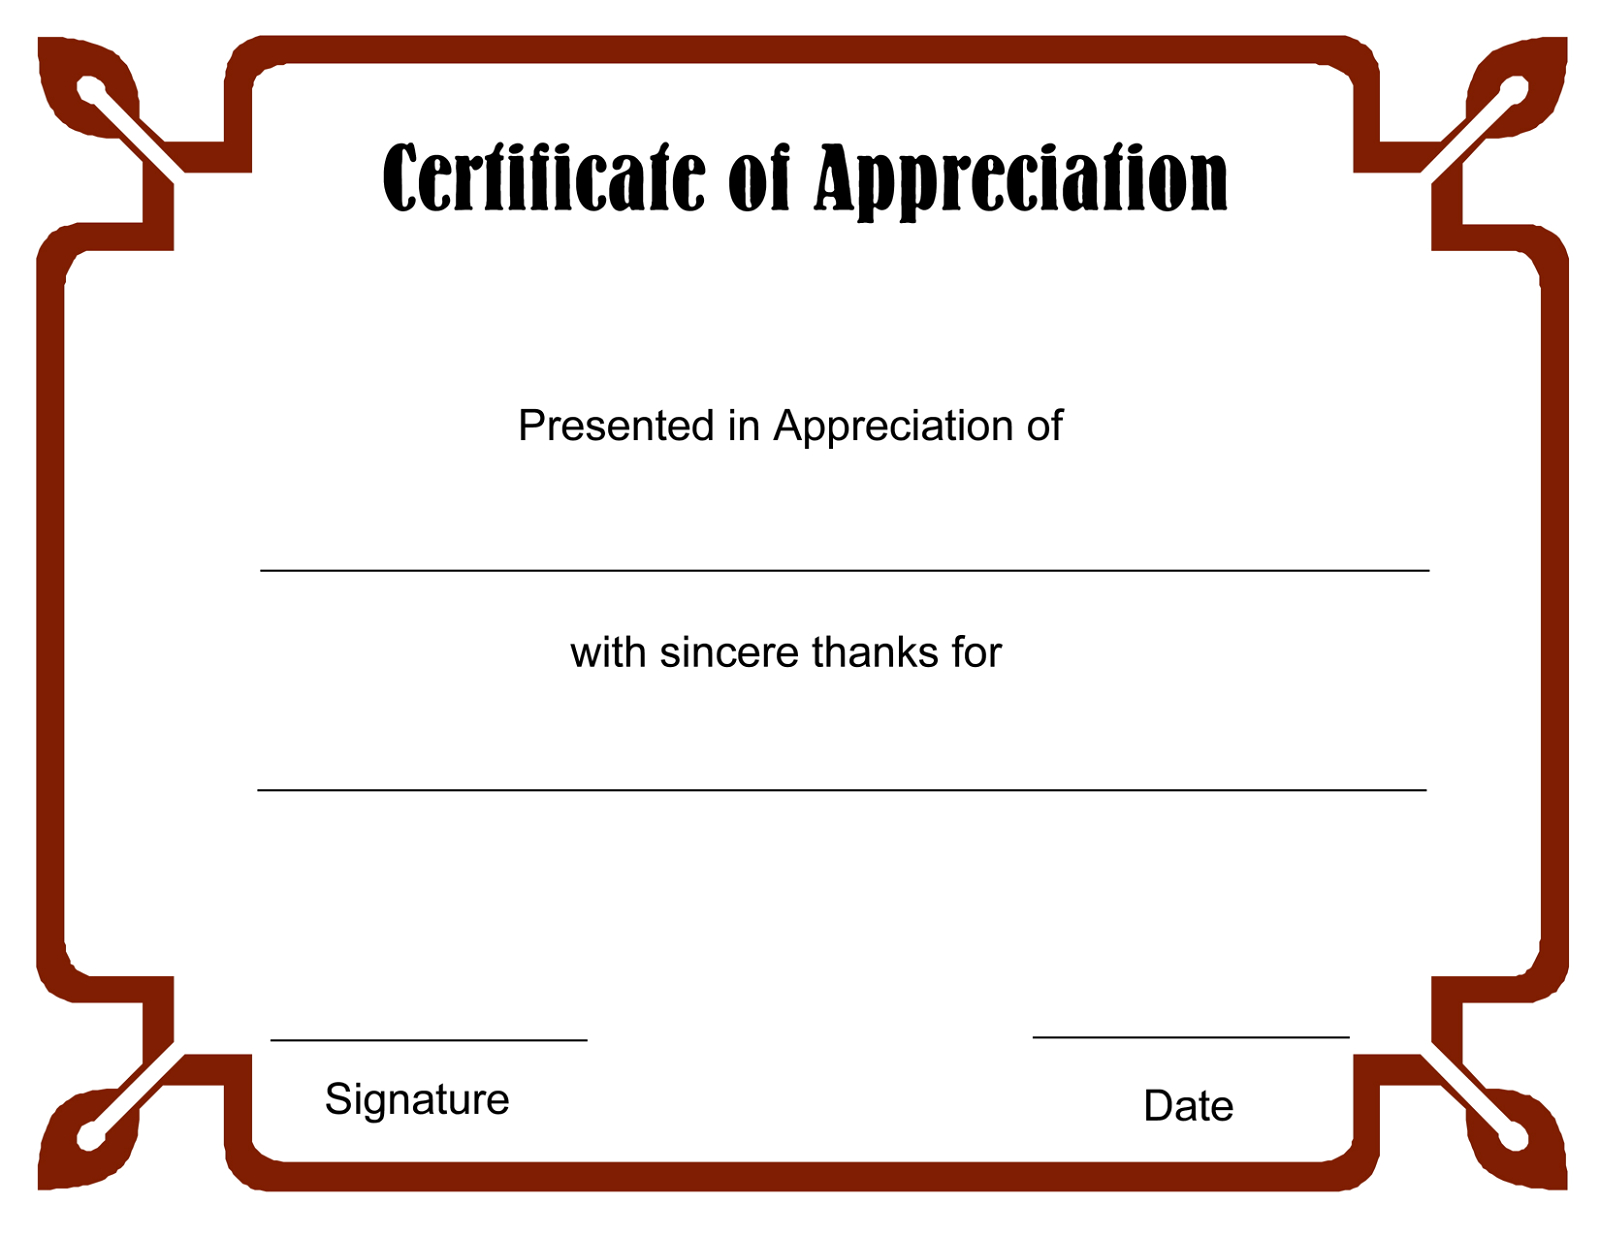 Blank Certificate Templates To Print | Blank Certificate Templates - Free Printable Blank Certificate Templates